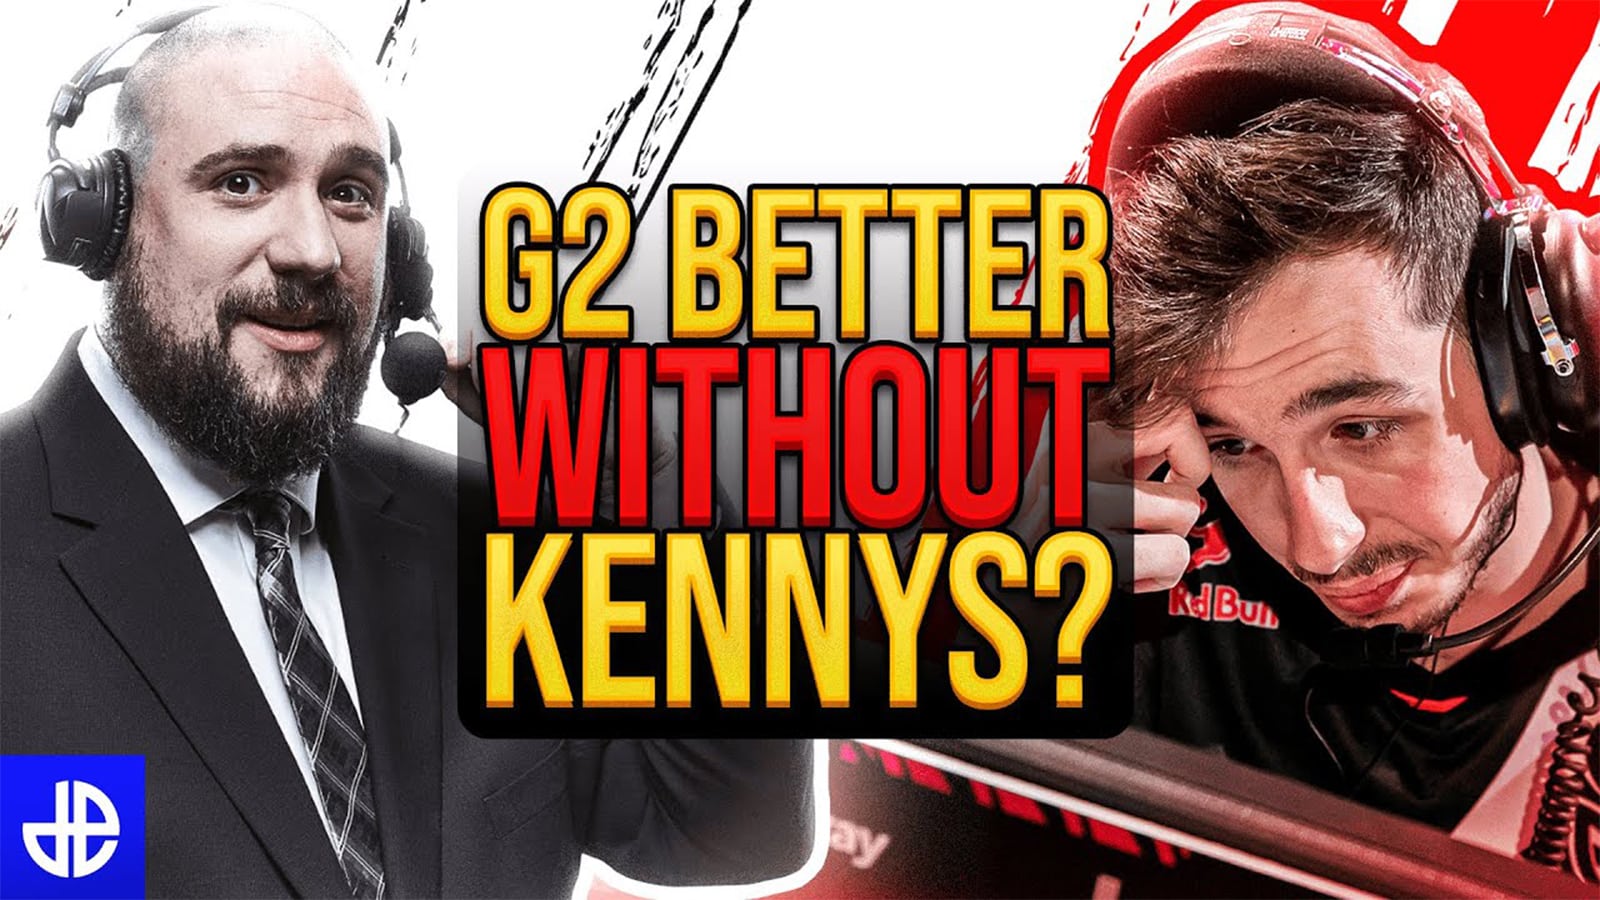 KennyS’ unlikely G2 replacement | Richard Lewis Reacts - Dexerto